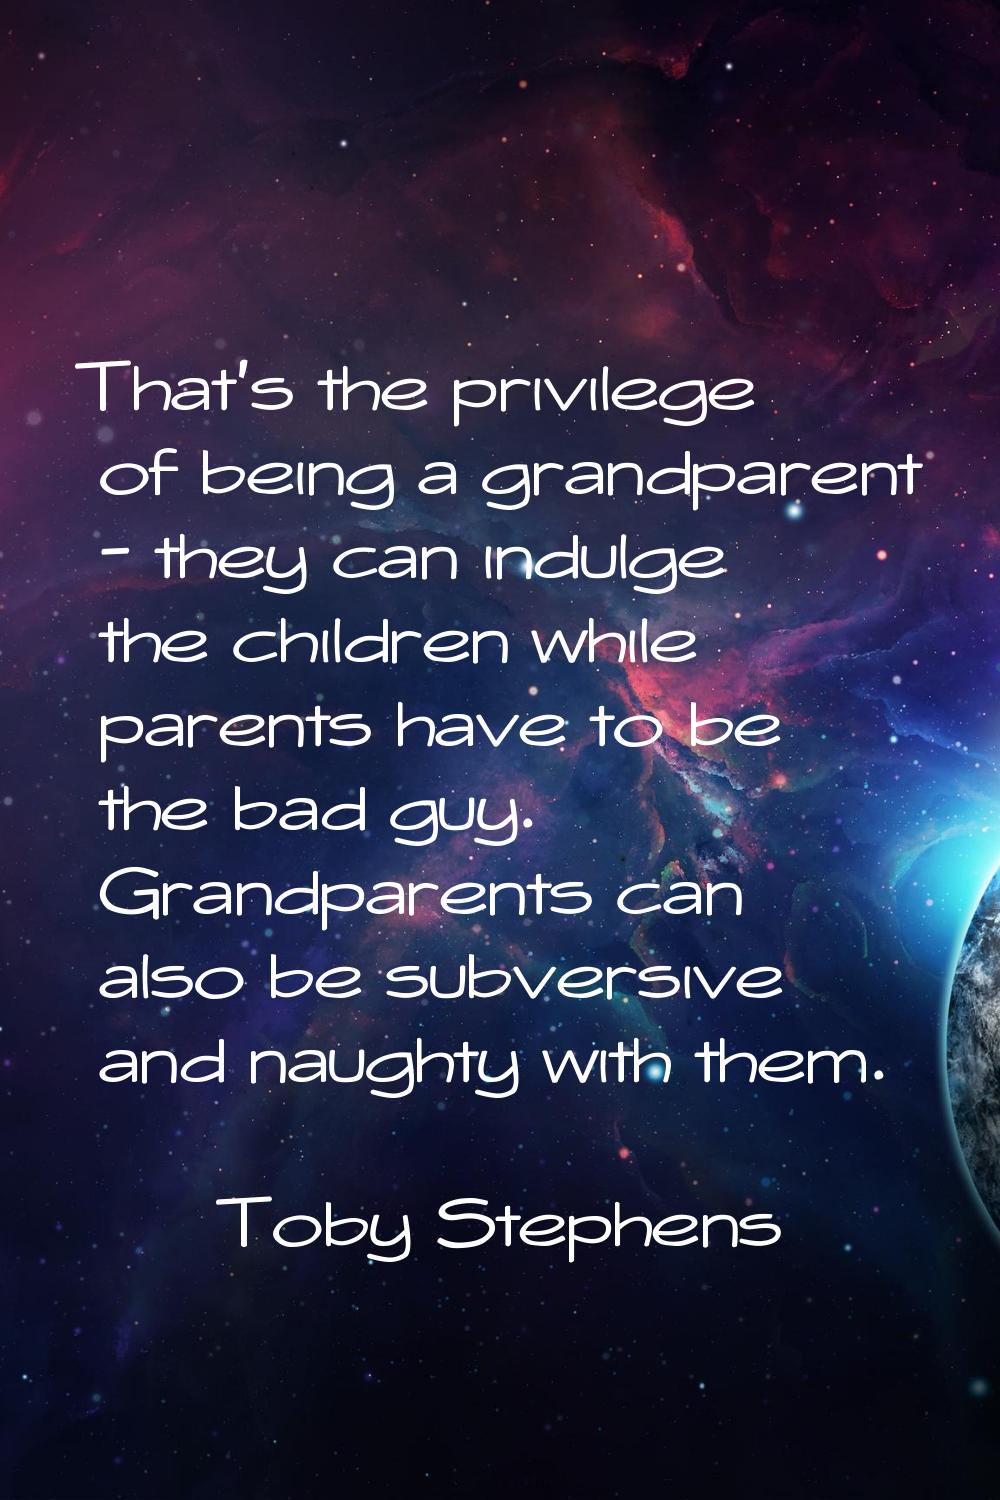 That's the privilege of being a grandparent - they can indulge the children while parents have to b